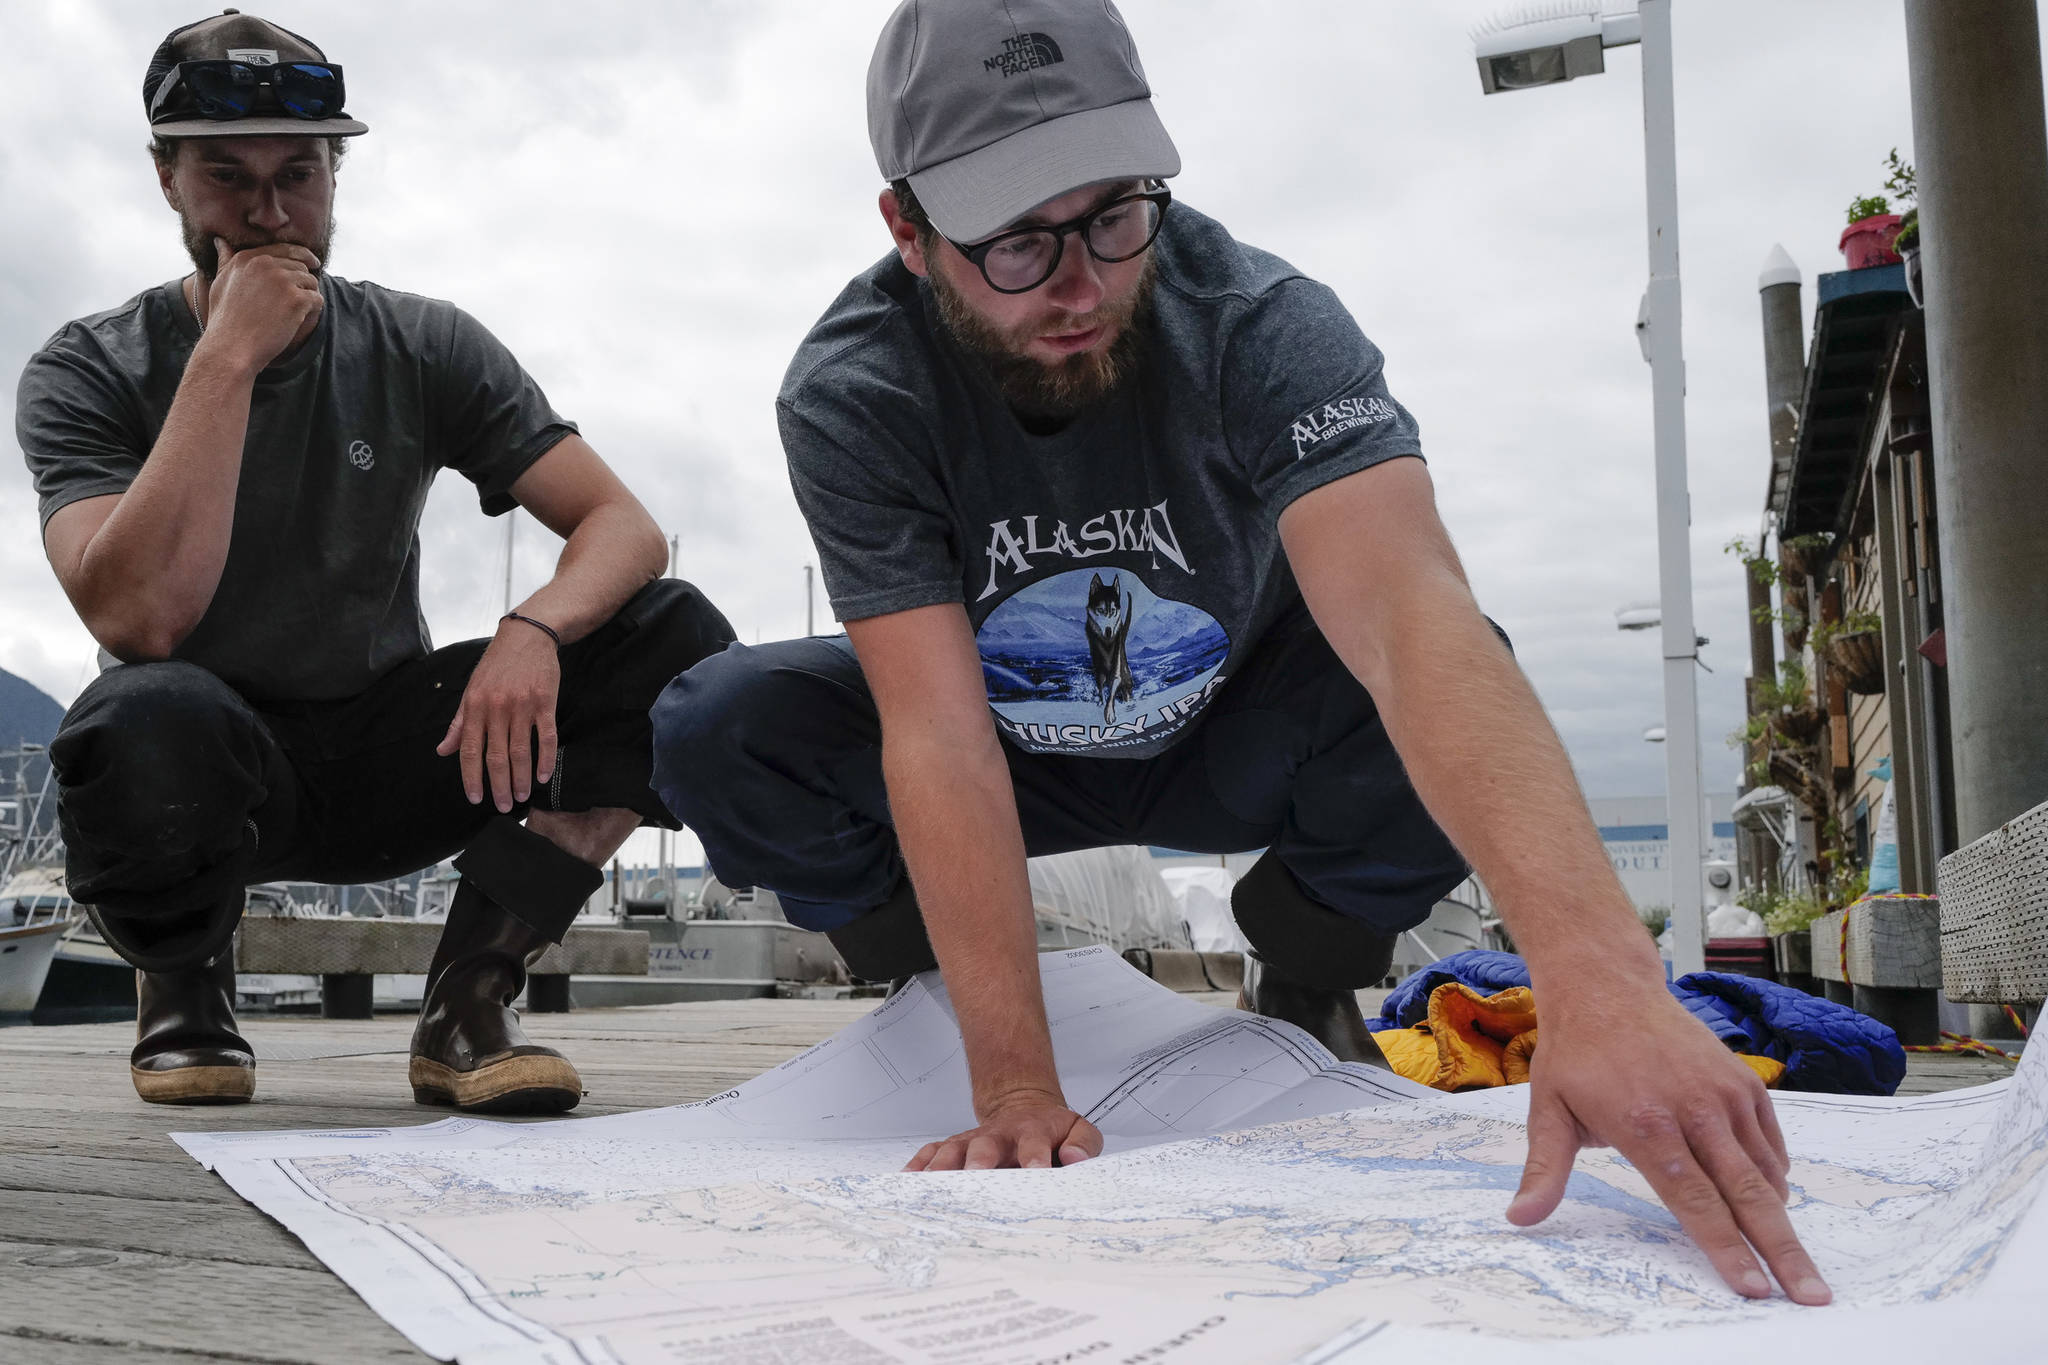 Liam Godfrey-Jolicoeur, left, and Jake Dombek, talk at Harris Harbor on Thursday, Aug. 2, 2019, about their nearly two-month long trip up the Inside Passage by canoe. Both are orginally from Vermont used the trip to raise money and bring awareness to environmental causes. (Michael Penn | Juneau Empire)